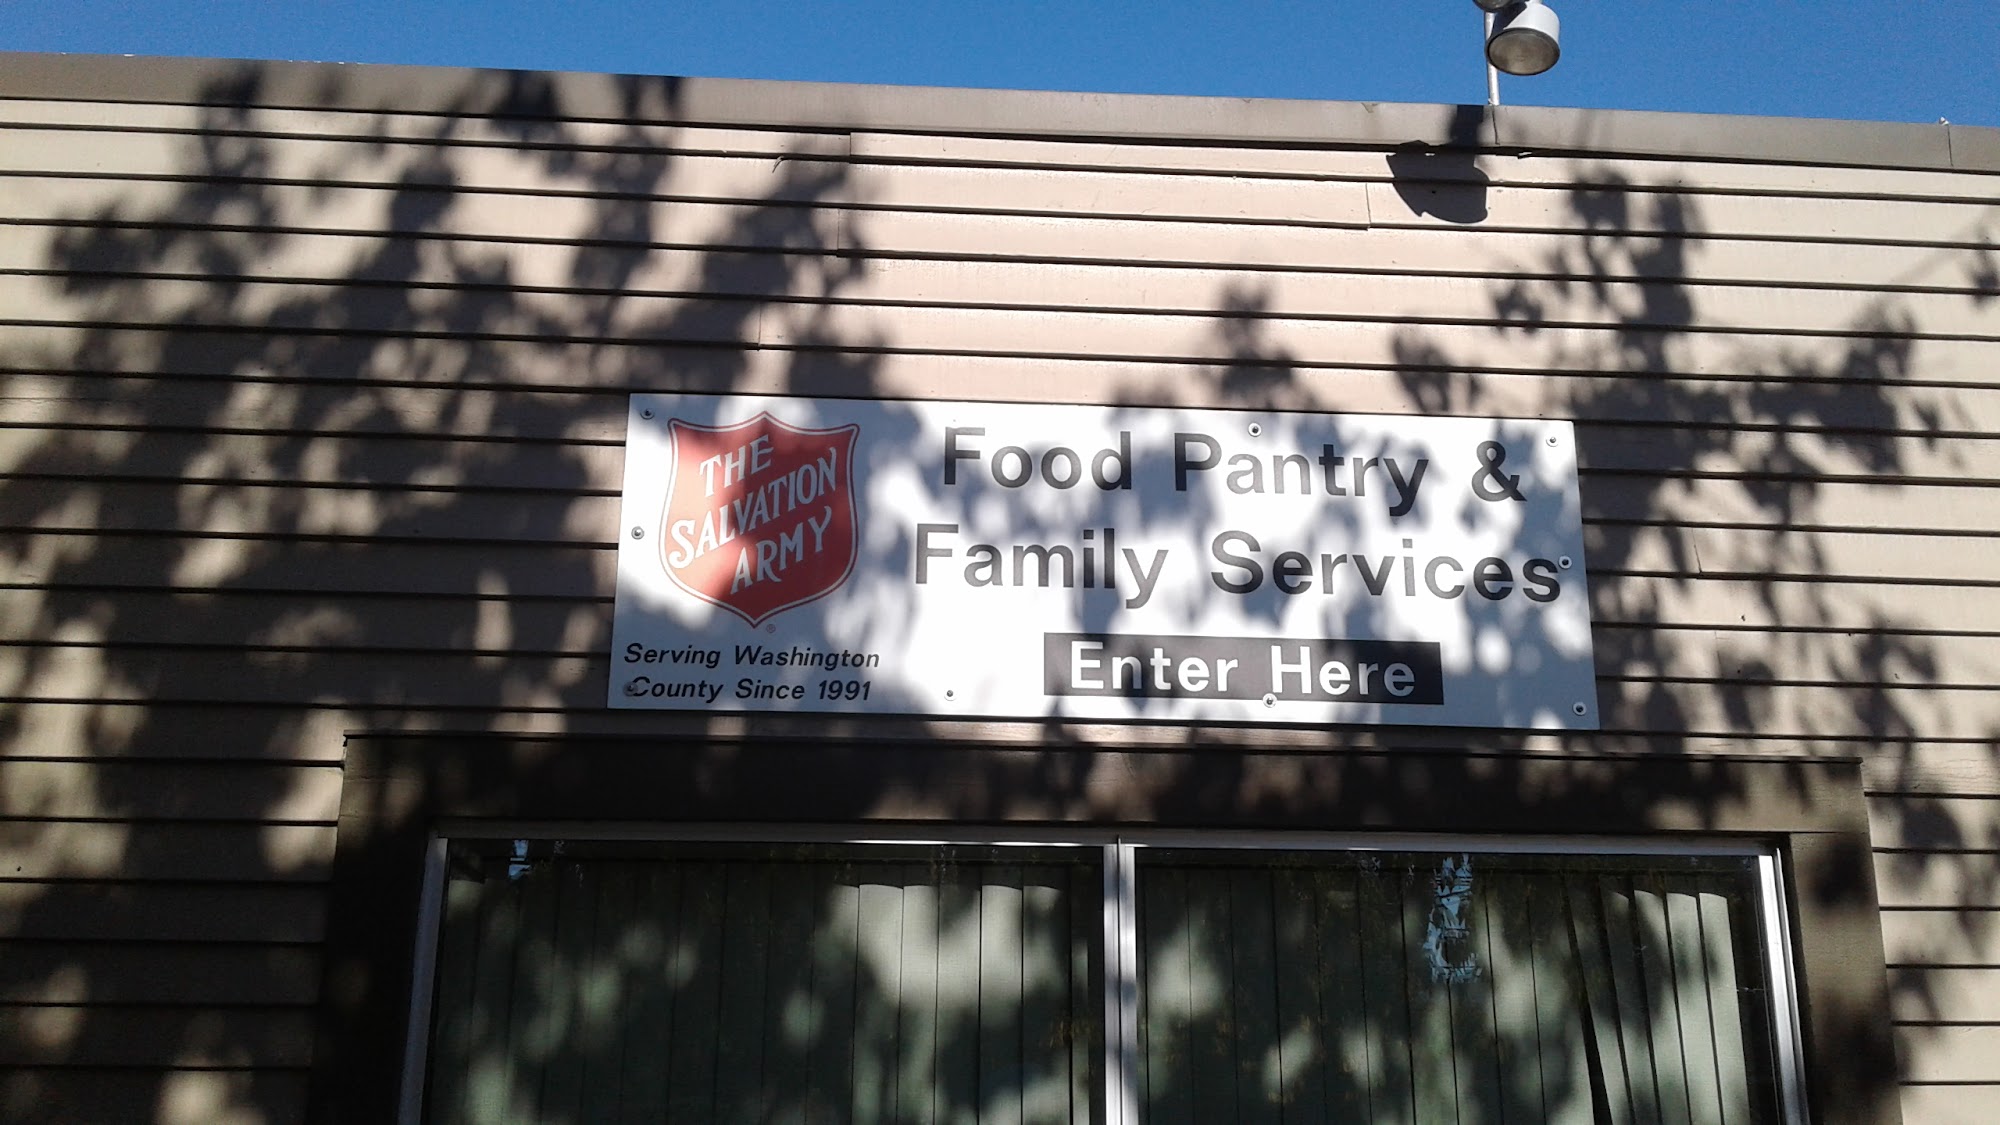 The Salvation Army Tualatin Valley Service Center